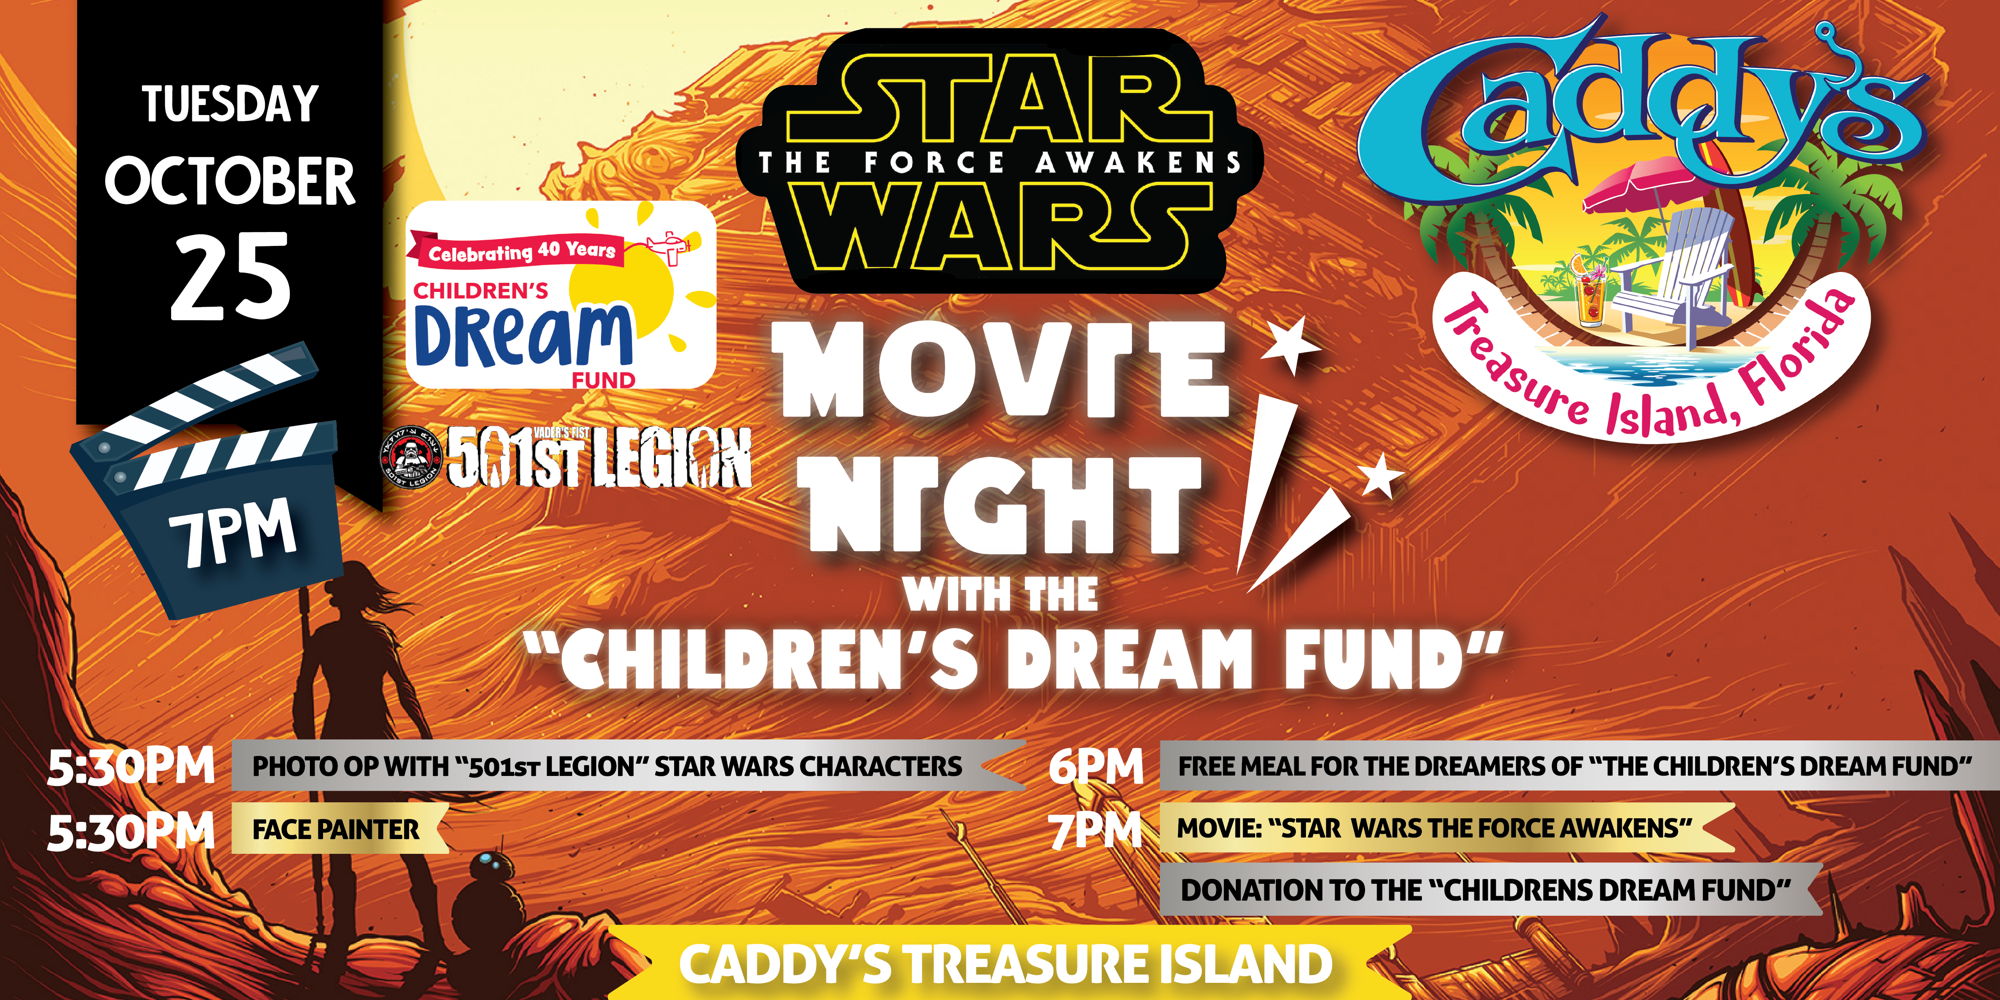 Movie Night with the “Children’s Dream Fund” promotional image